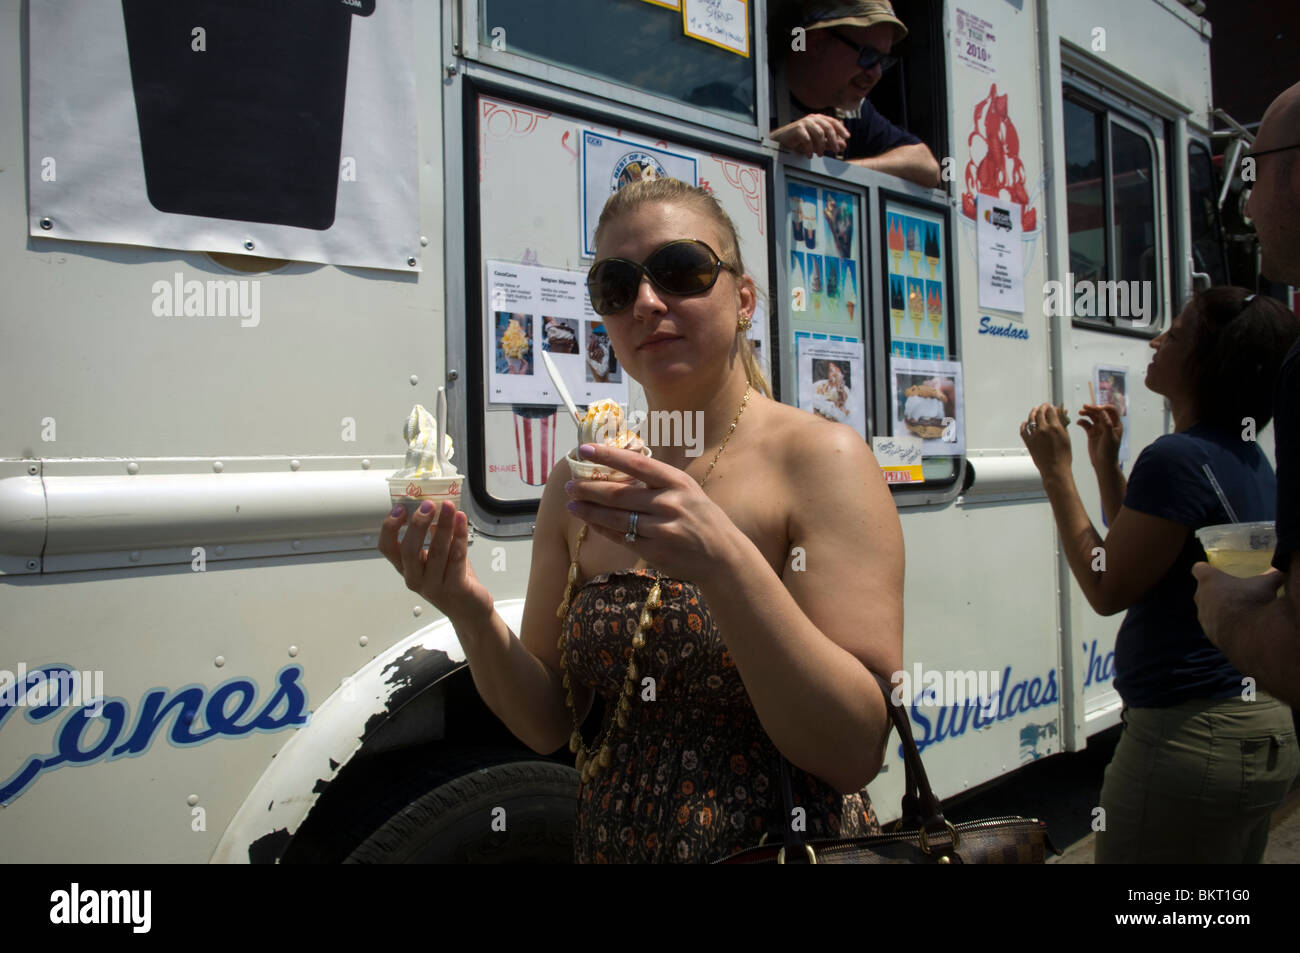 A woman carries ice cream from The Big Gay Ice Cream Truck at the Hell's Kitchen Food Truck Bazaar Stock Photo